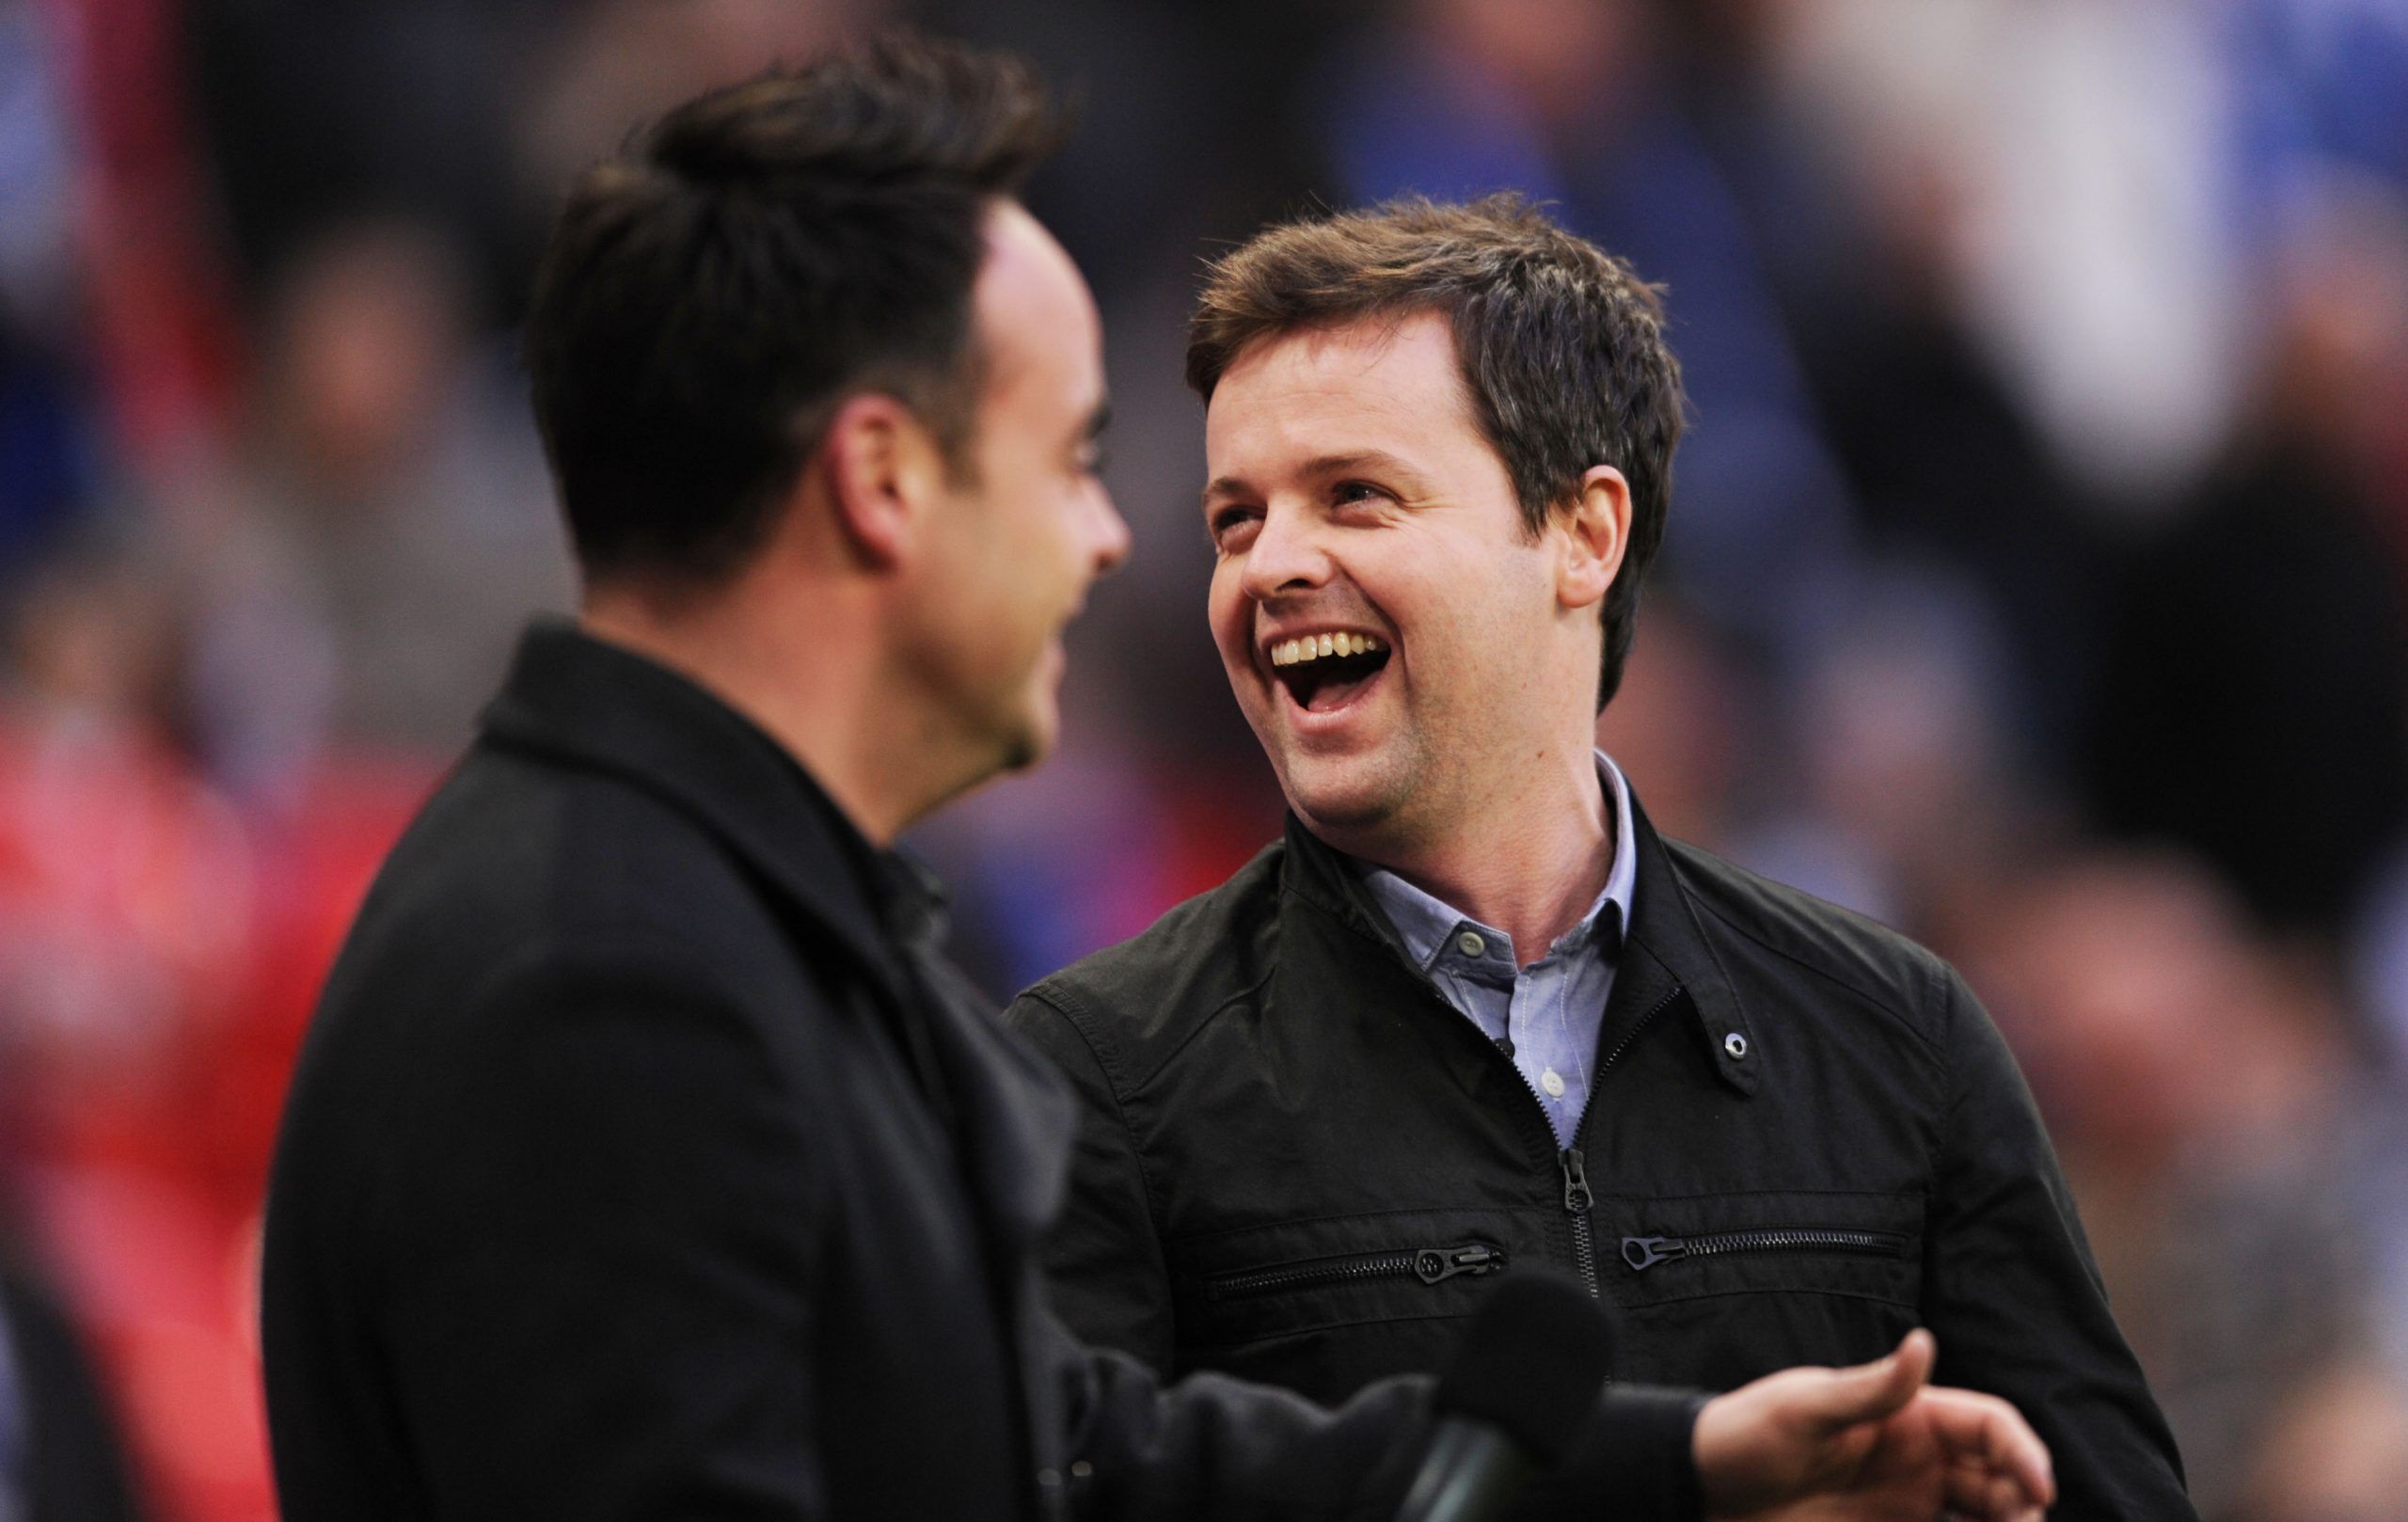 Football - Arsenal v Birmingham City - Carling Cup Final - Wembley Stadium - 10/11 - 27/2/11 
TV presenters Anthony McPartlin (L) and Declan Donnelly (Ant and Dec)  
Mandatory Credit: Action Images / Alex Morton